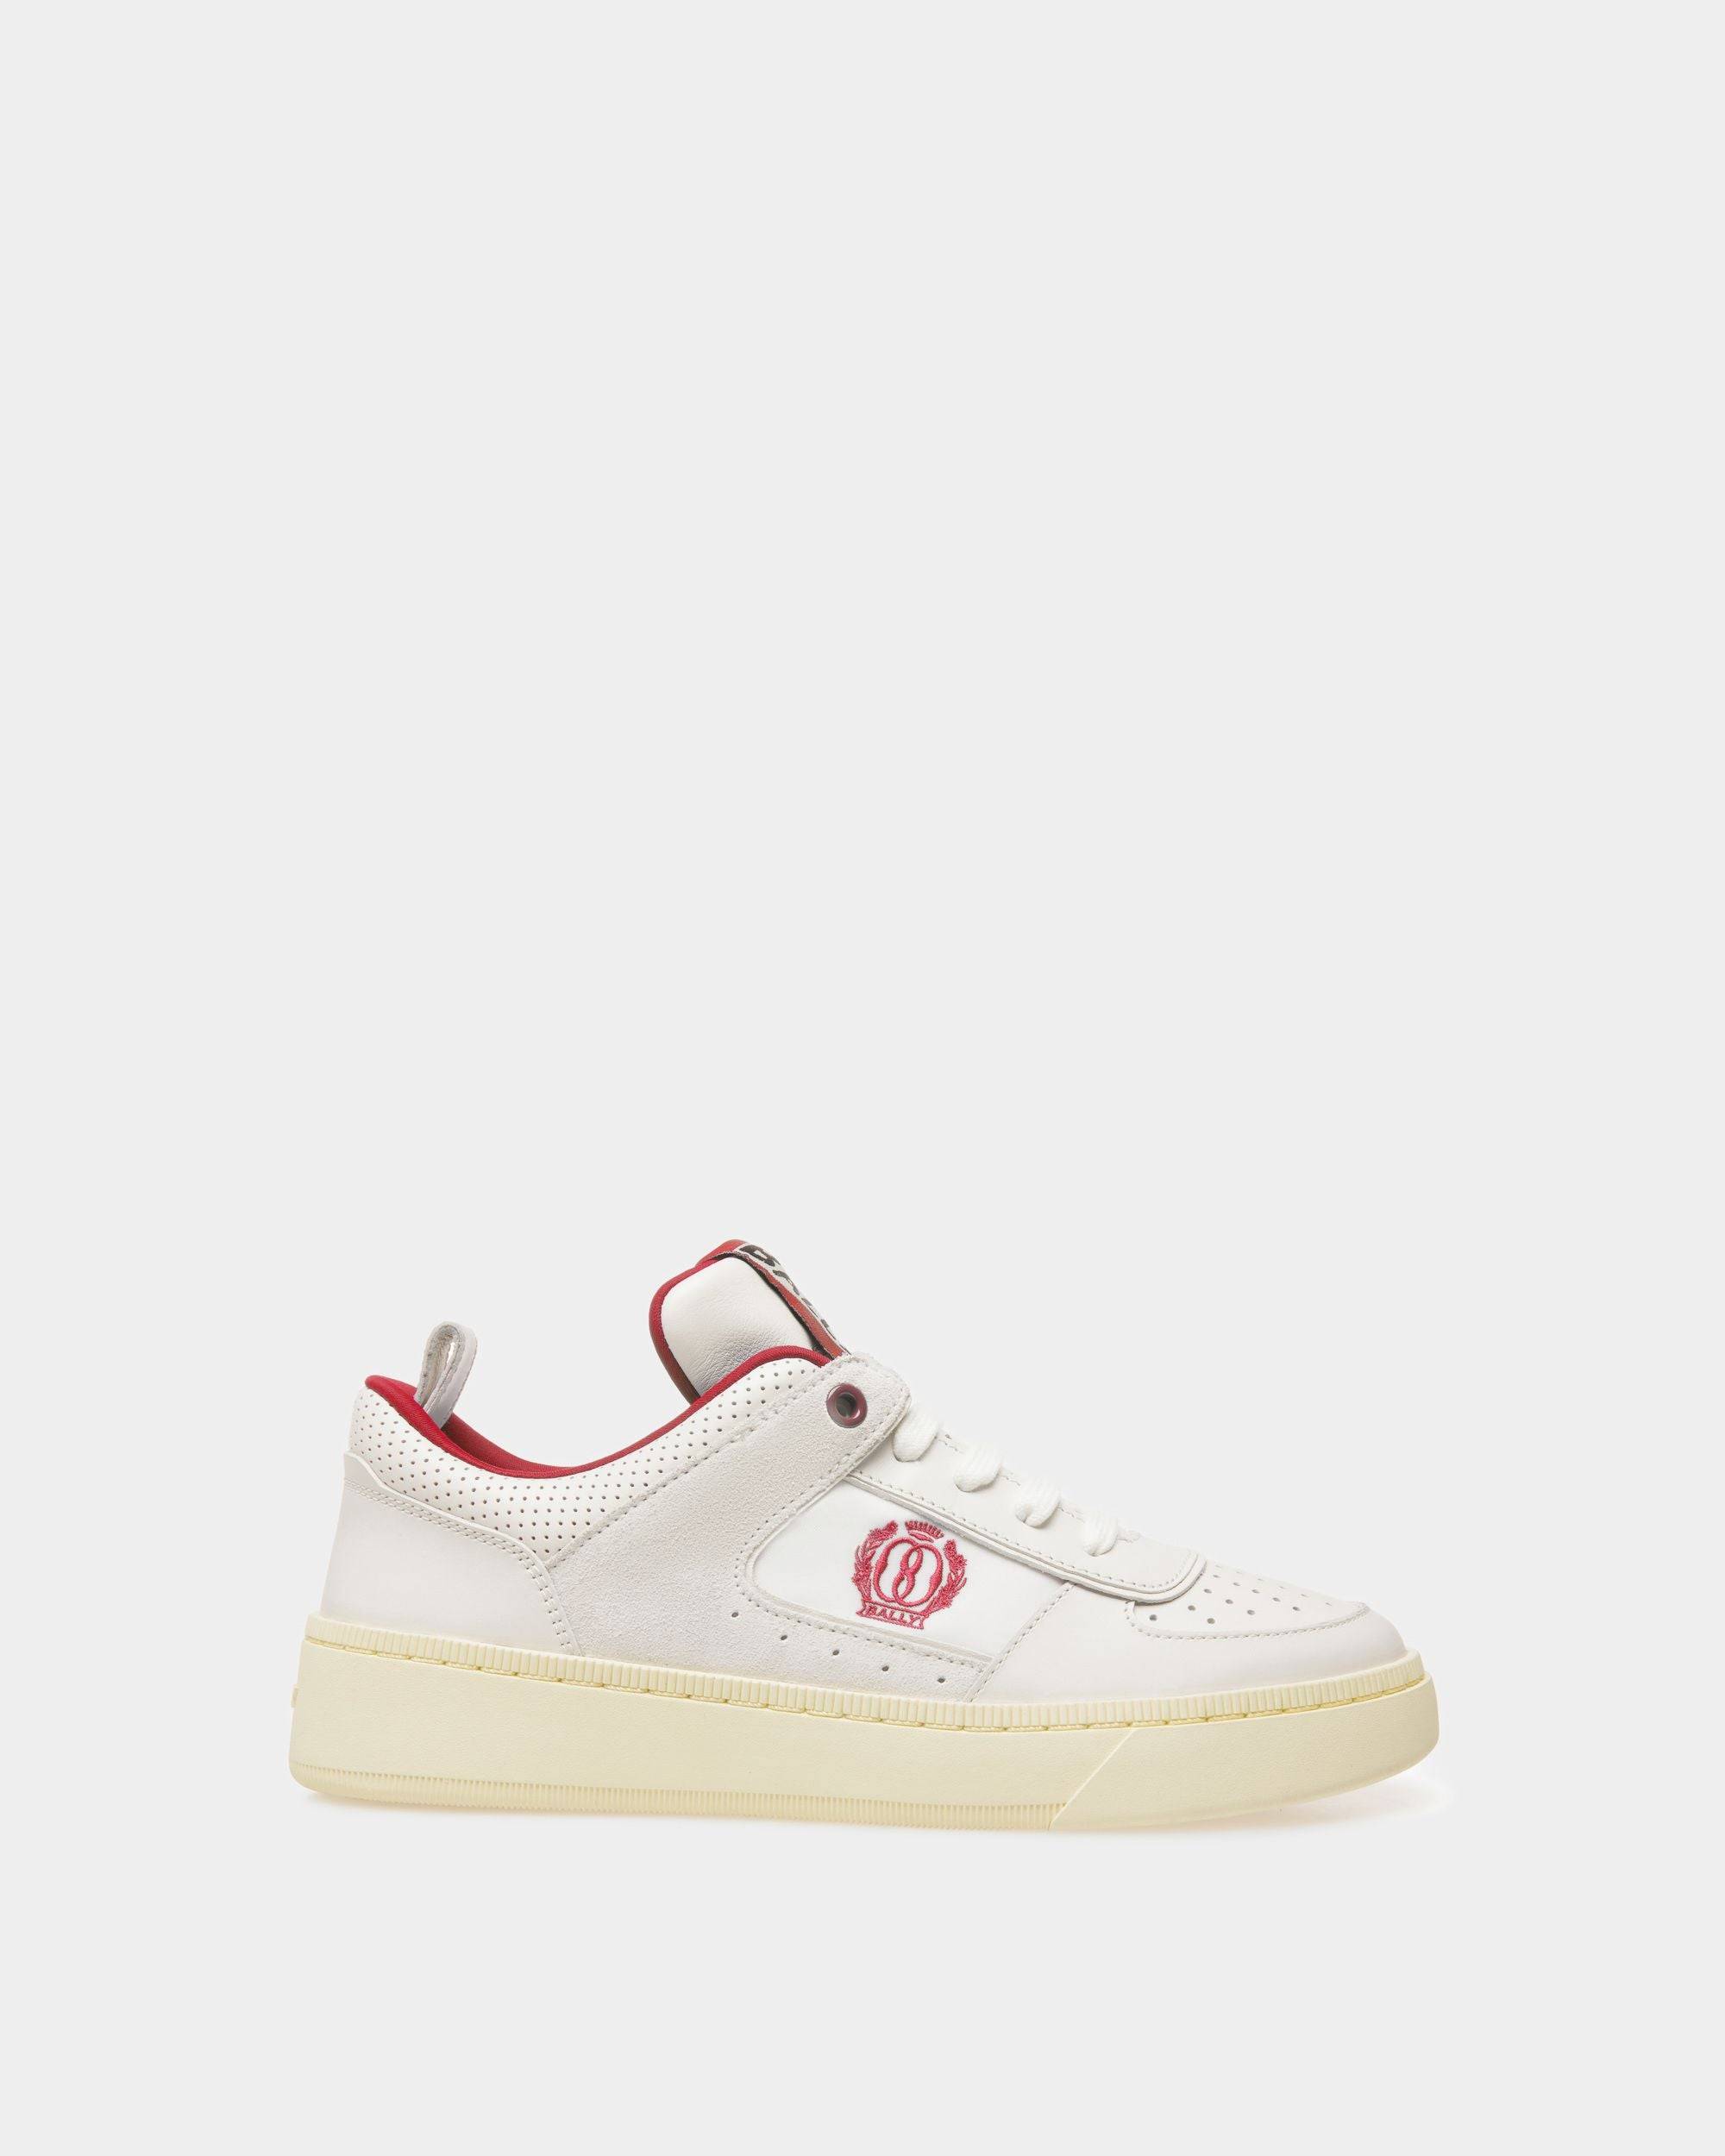 Riweira | Women's Sneakers | White And Red Leather | Bally | Still Life Side